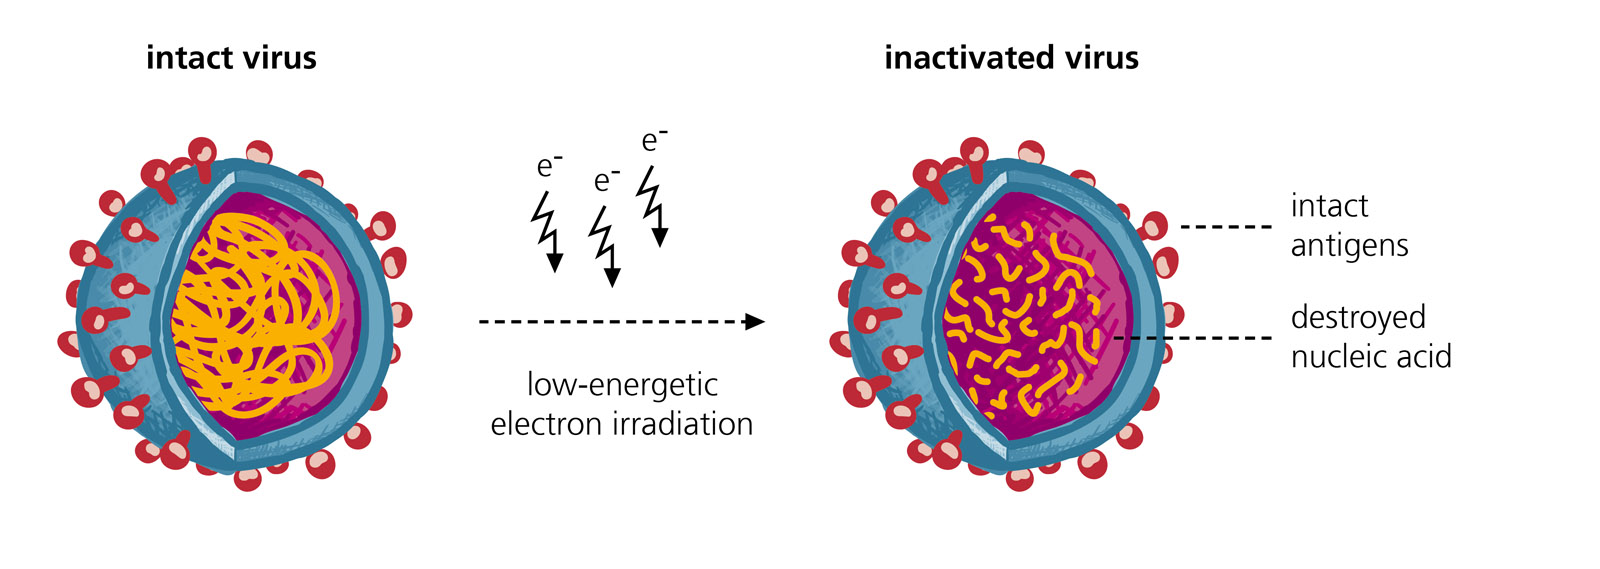 Viral inactivation by means of electron irradiation.